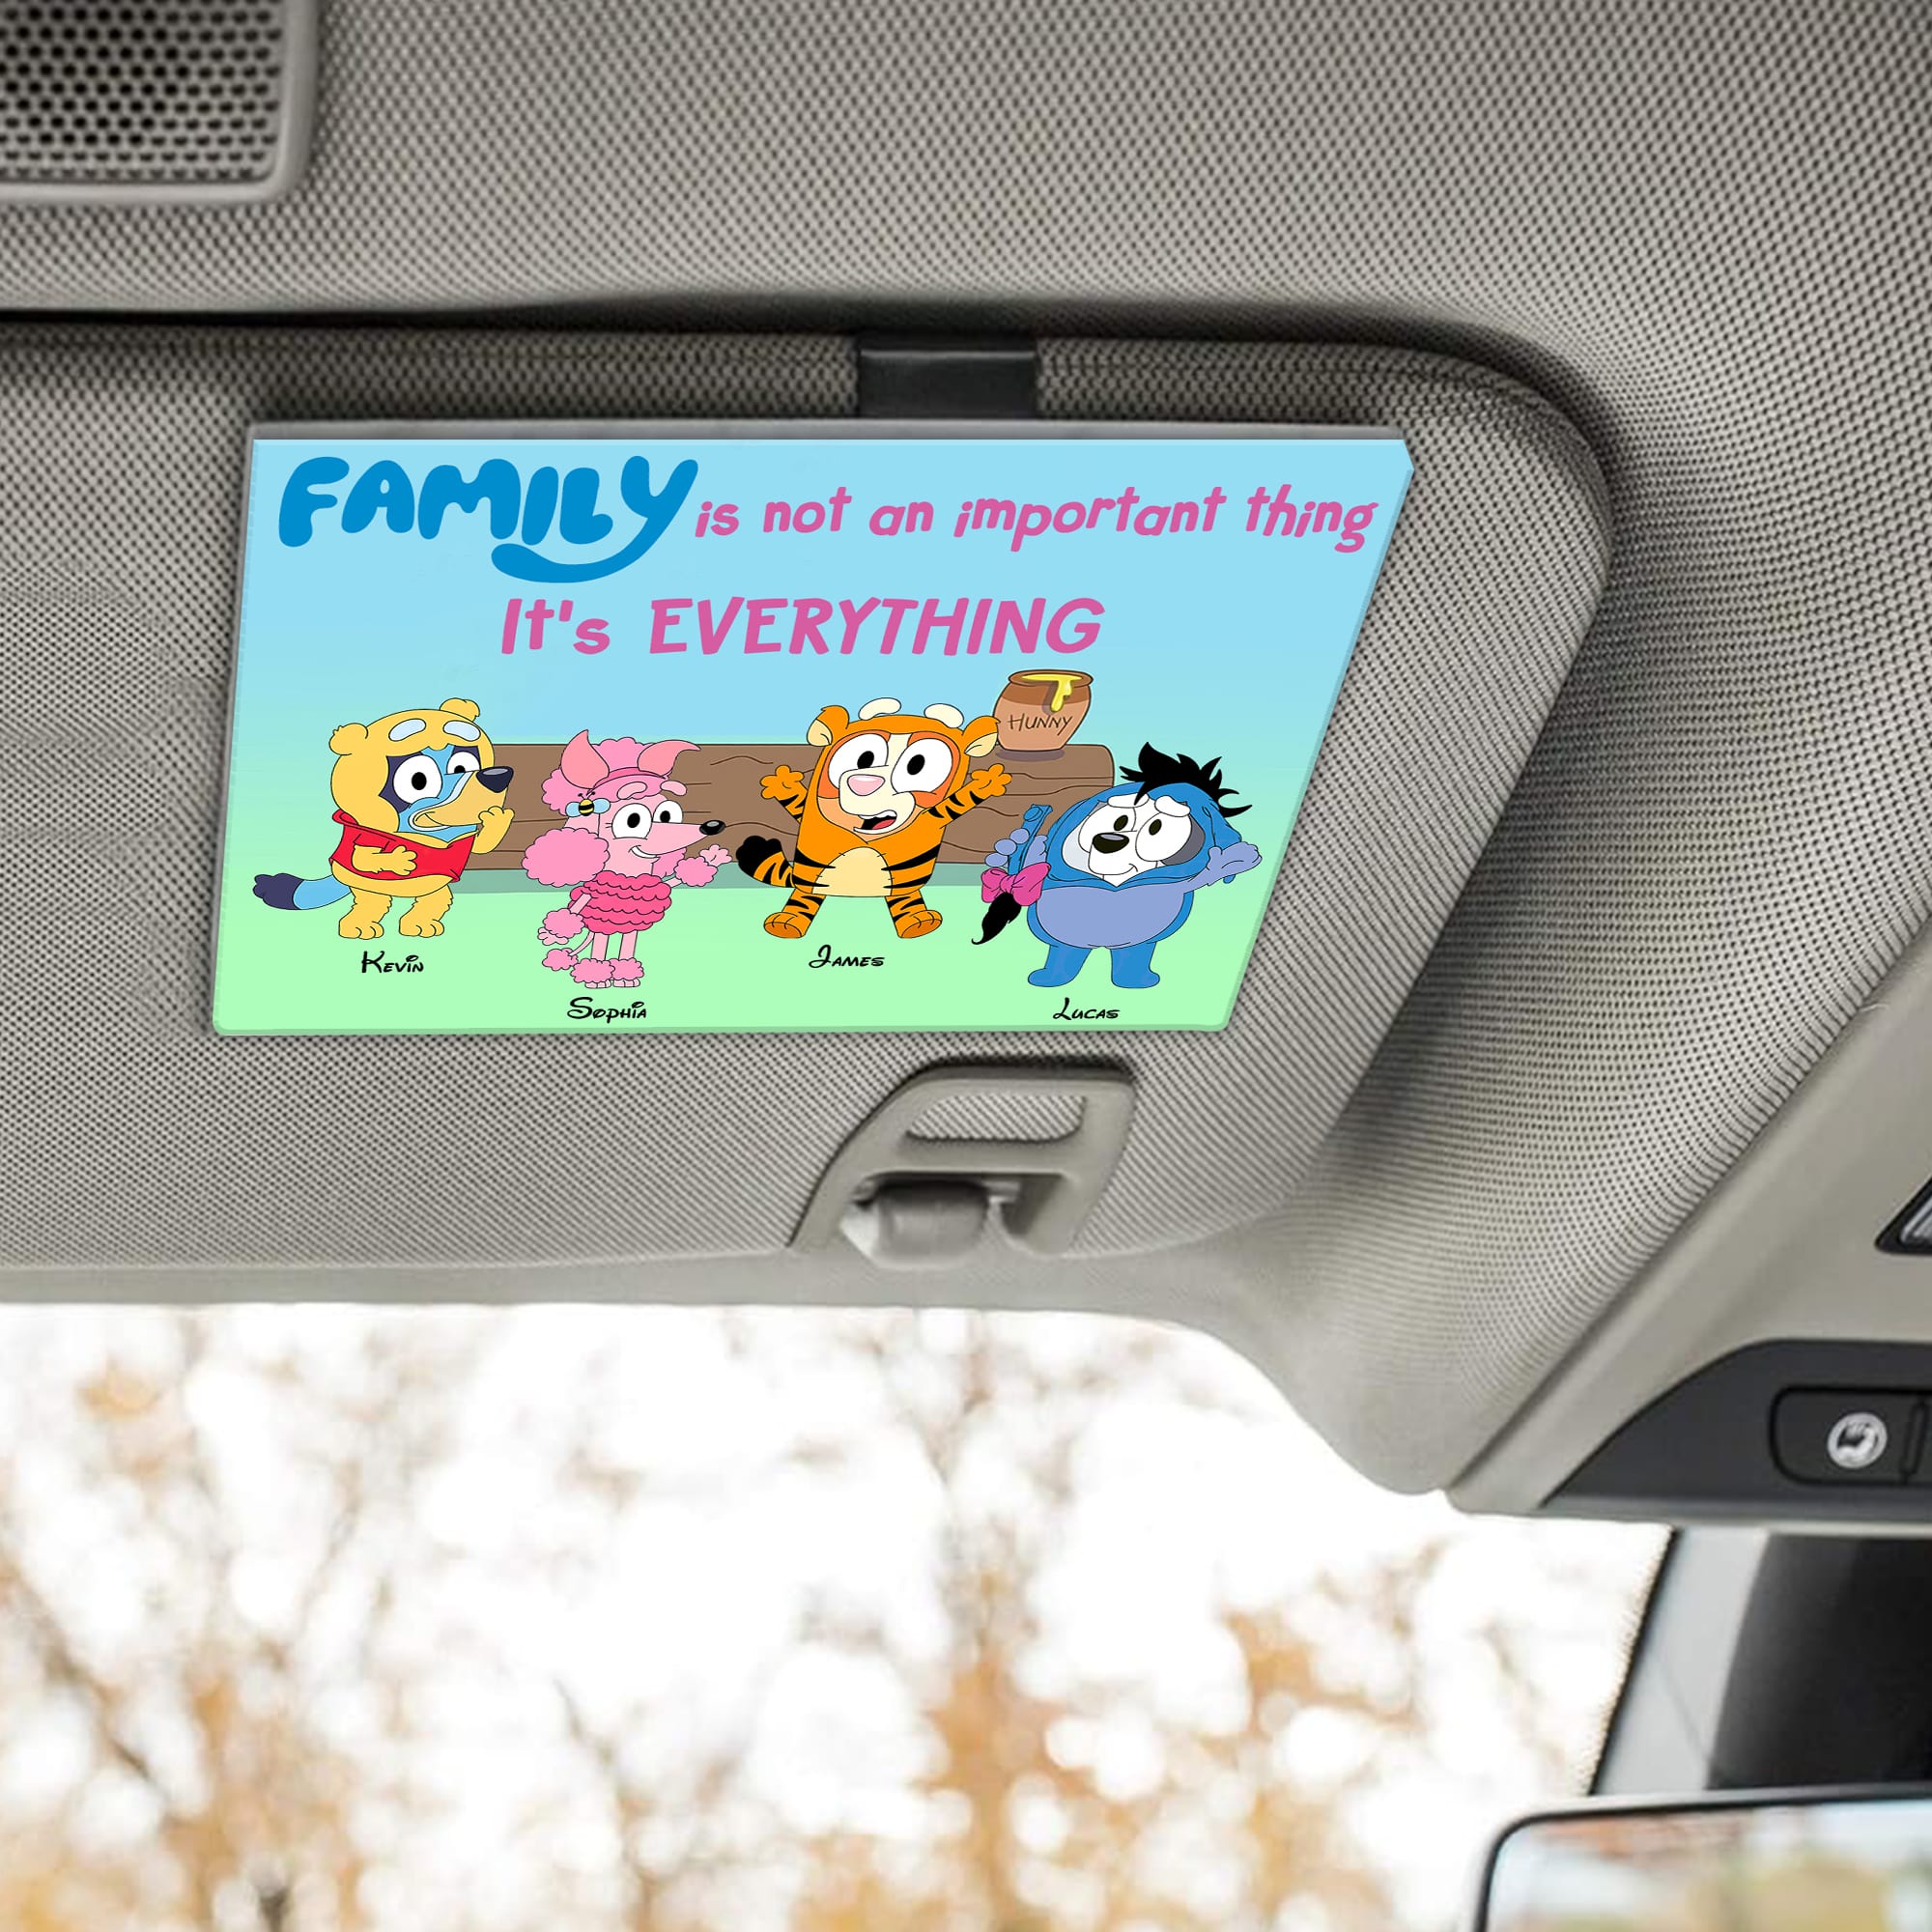 Personalized Gifts For Family Car Visor Clip Family Is Not An Important Thin, It's Everything 03kati100624-Homacus